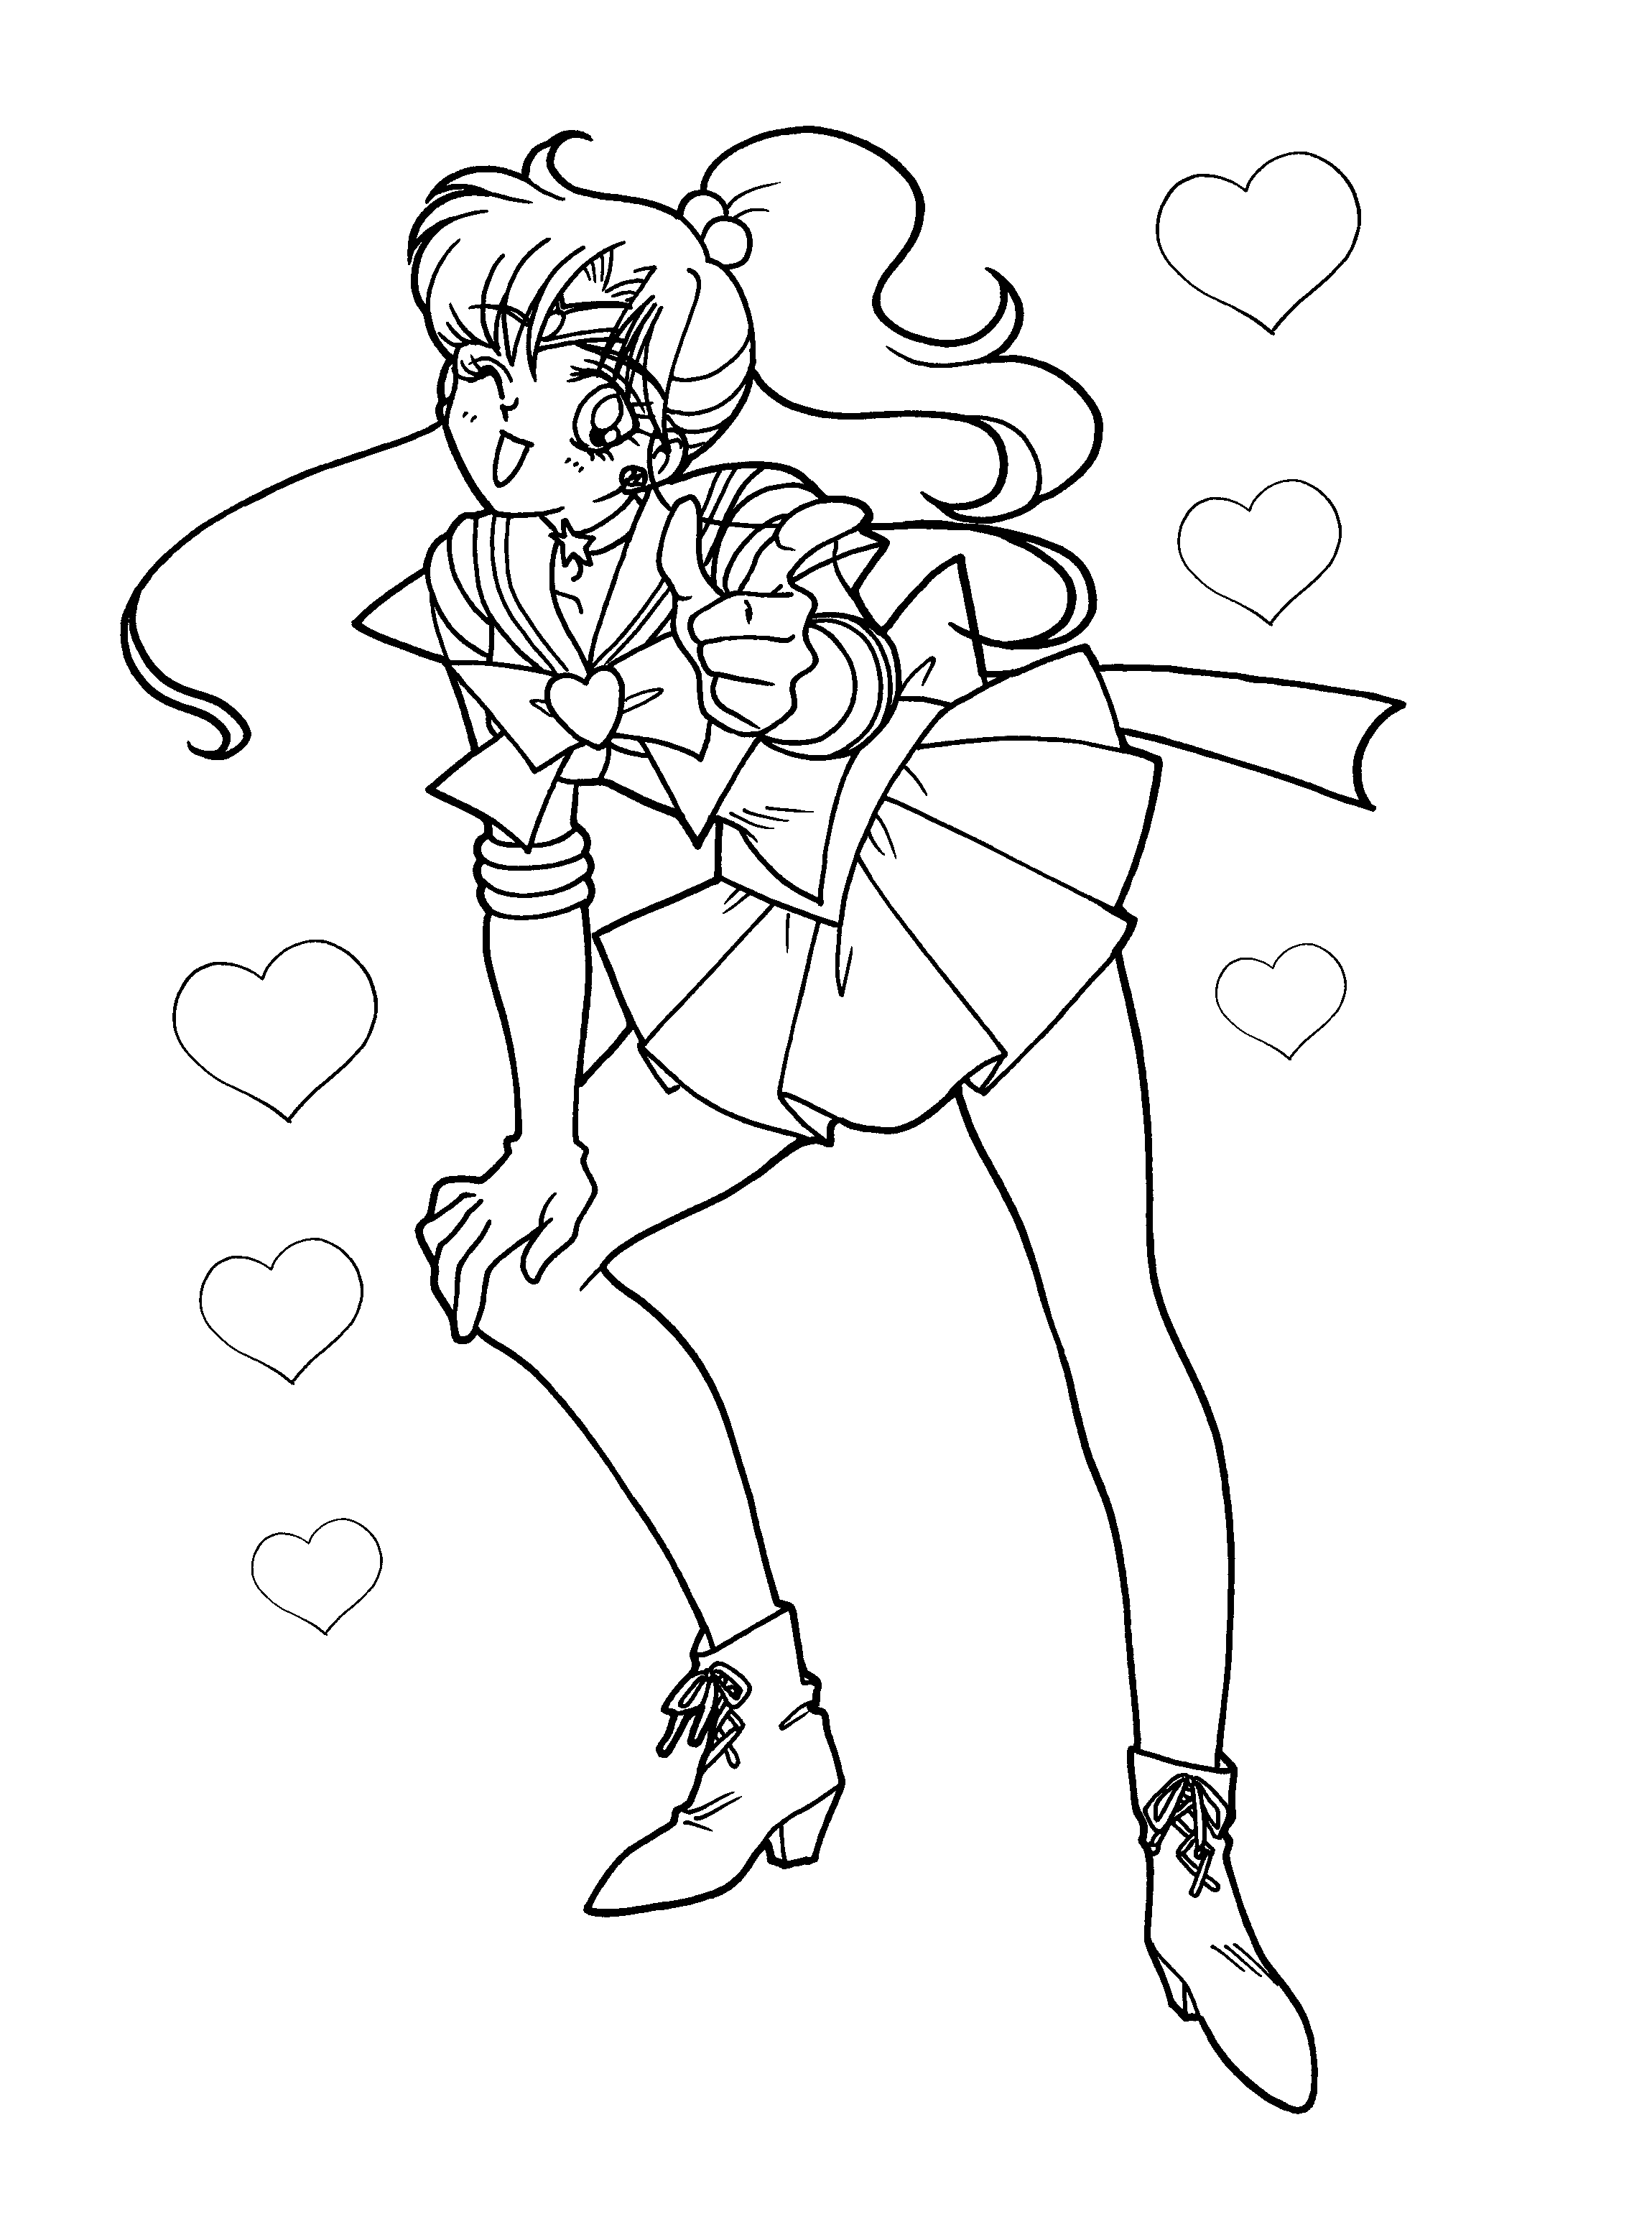 animated-coloring-pages-sailor-moon-image-0130